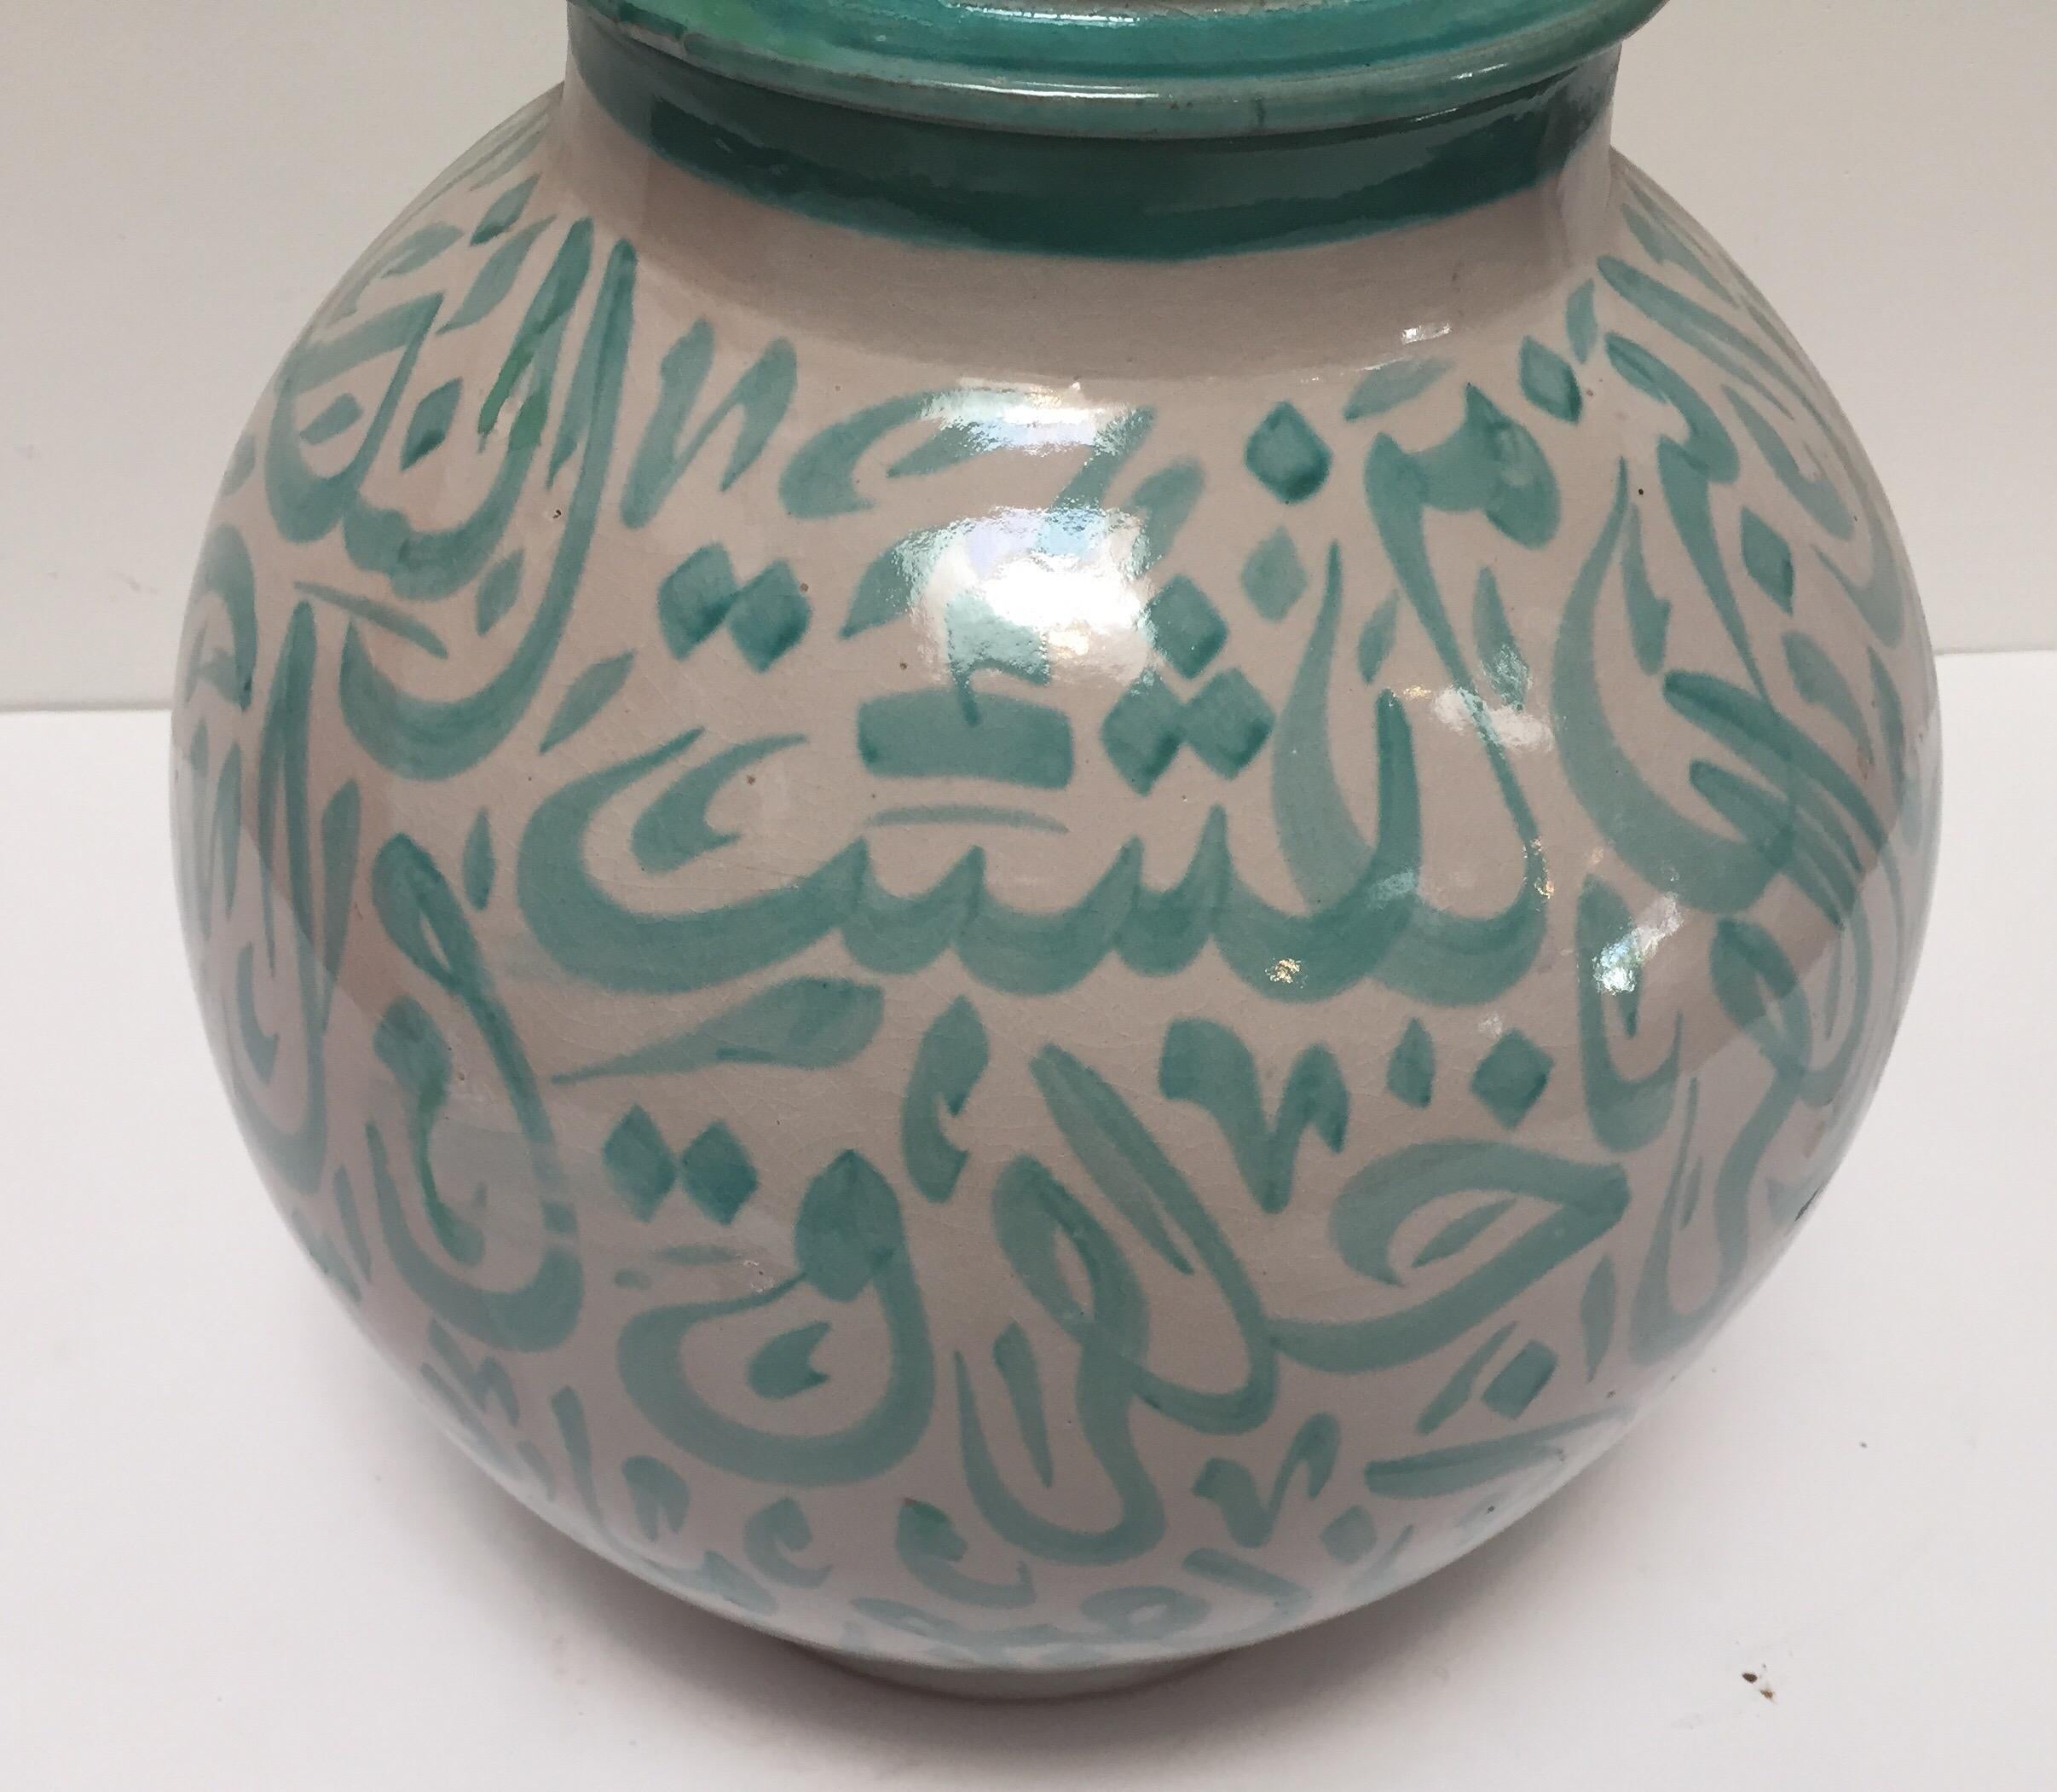 20th Century Moroccan Ceramic Lidded Urn from Fez with Arabic Calligraphy Lettrism Writing